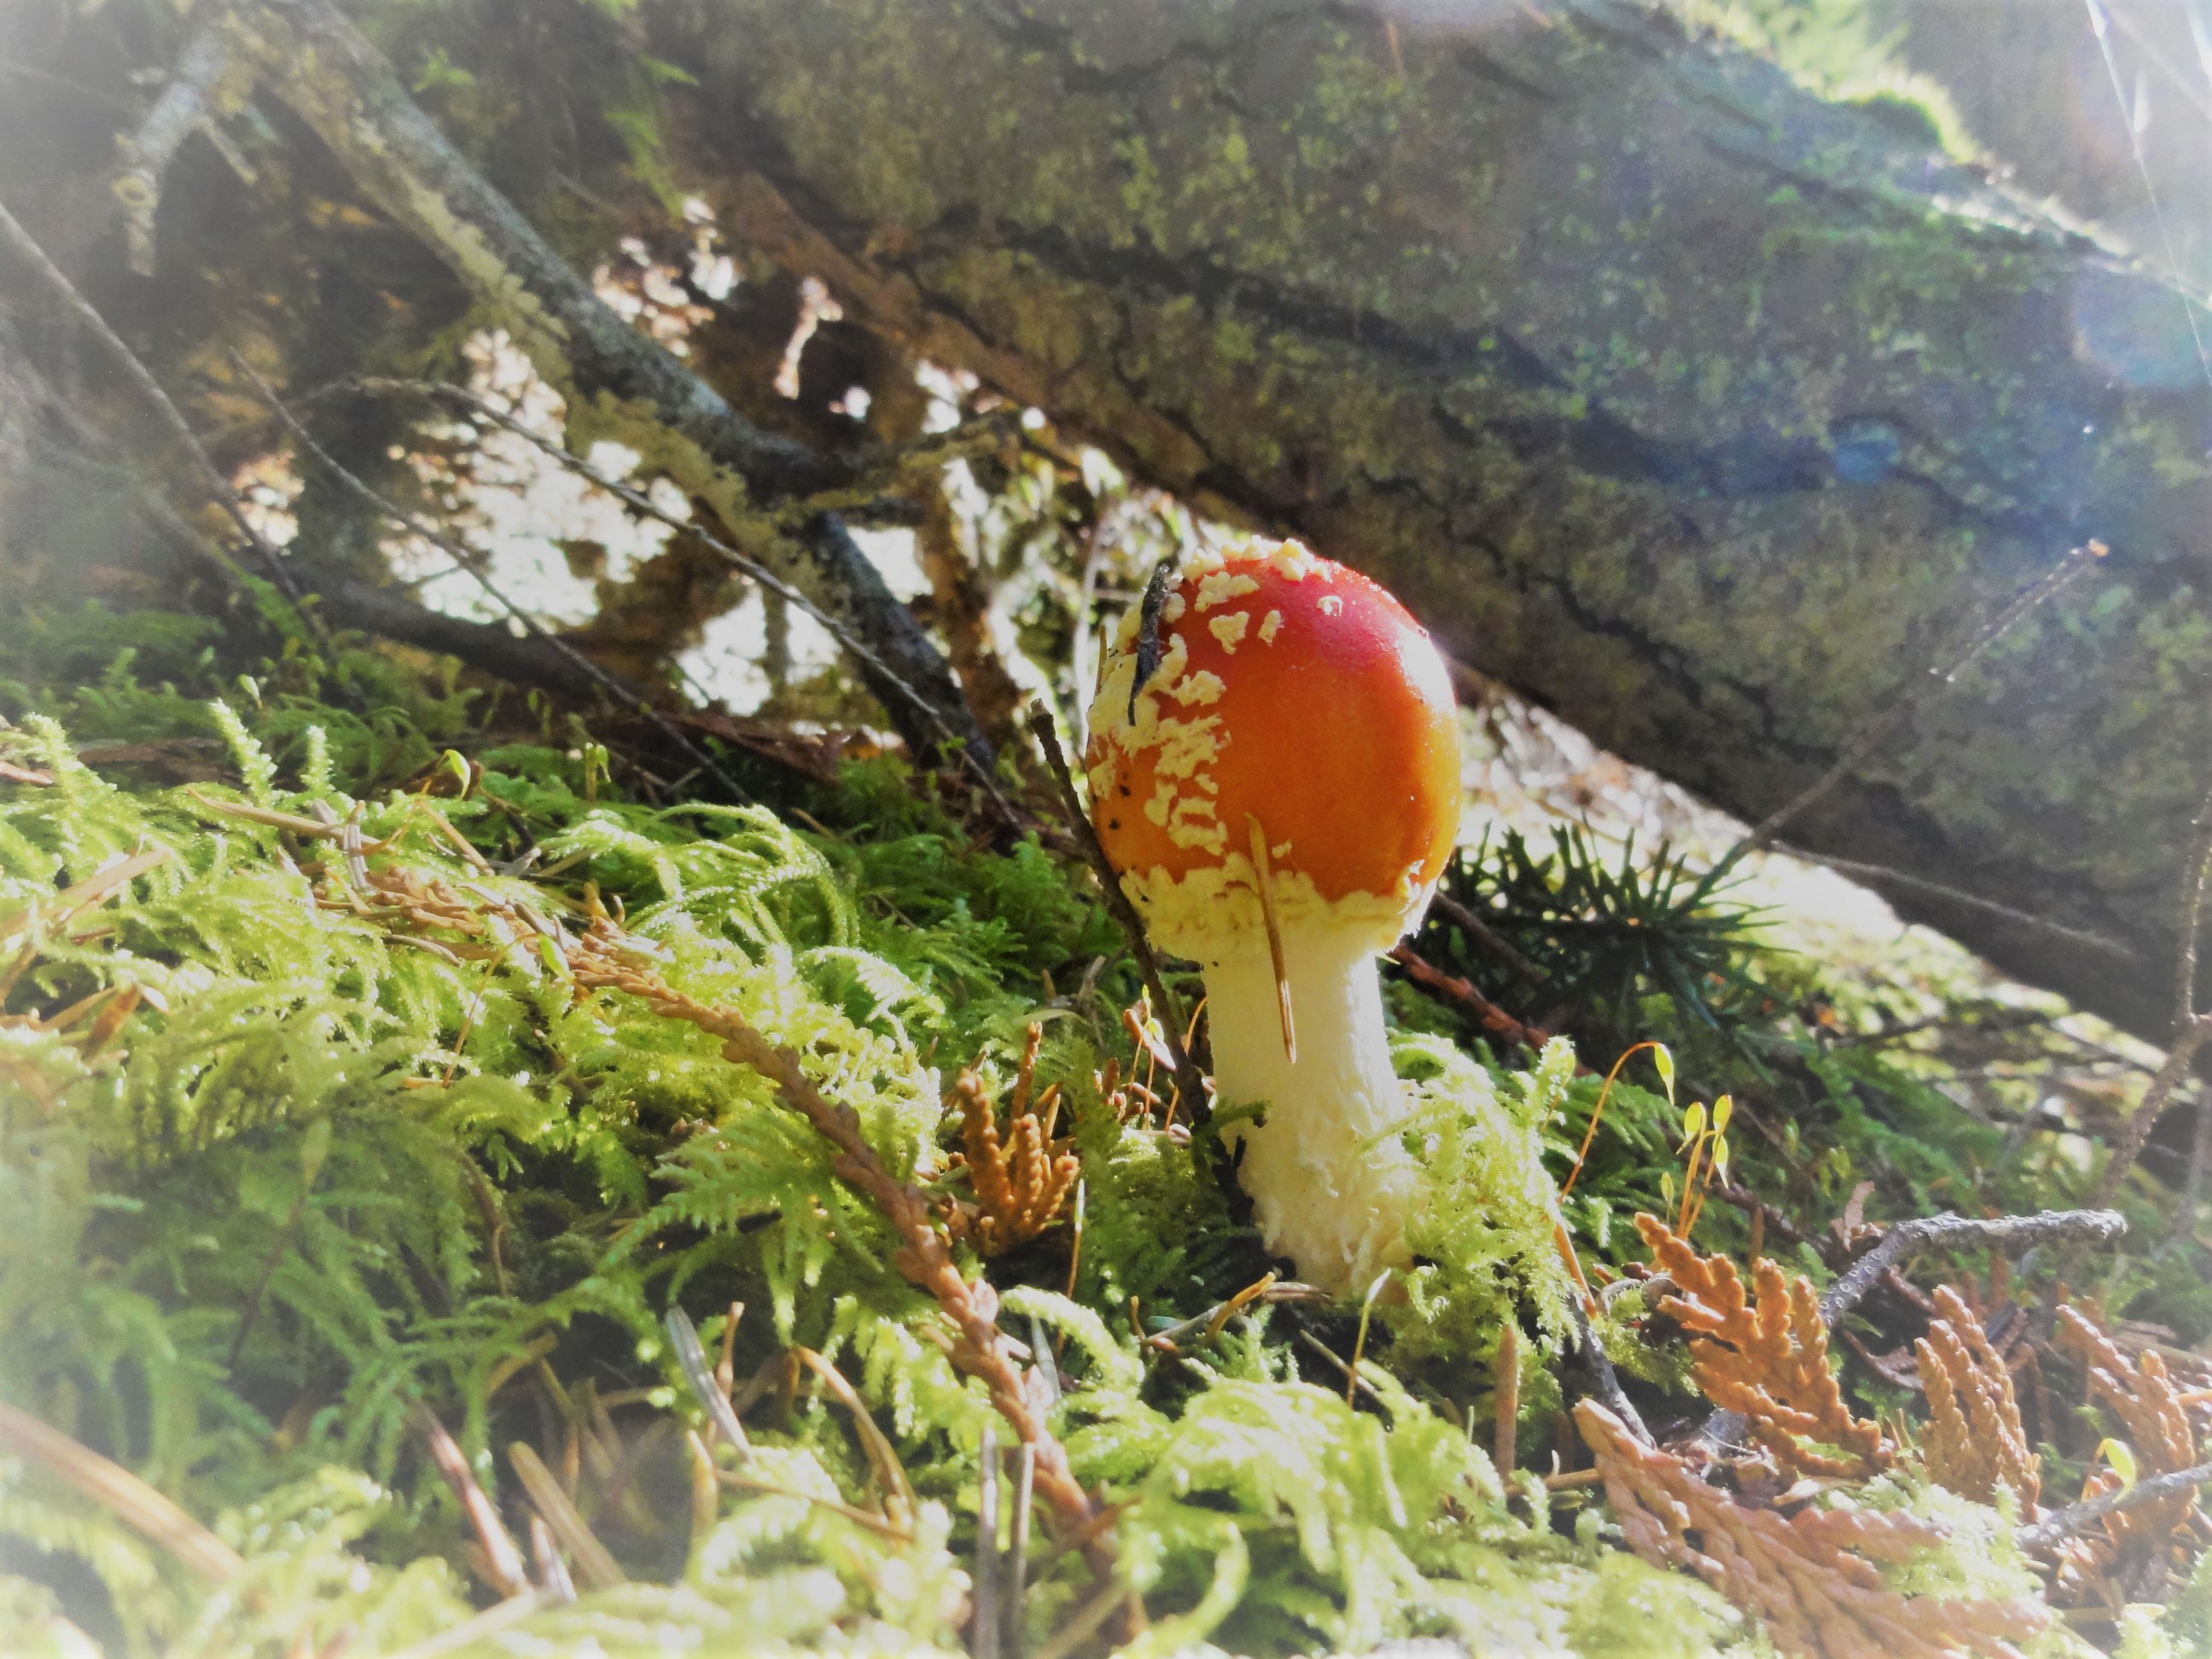 Amanita muscaria ("Fly Agaric") mushroom grows in Anacortes Community Forest Lands. Photograph credit: Skagit Land Trust staff.